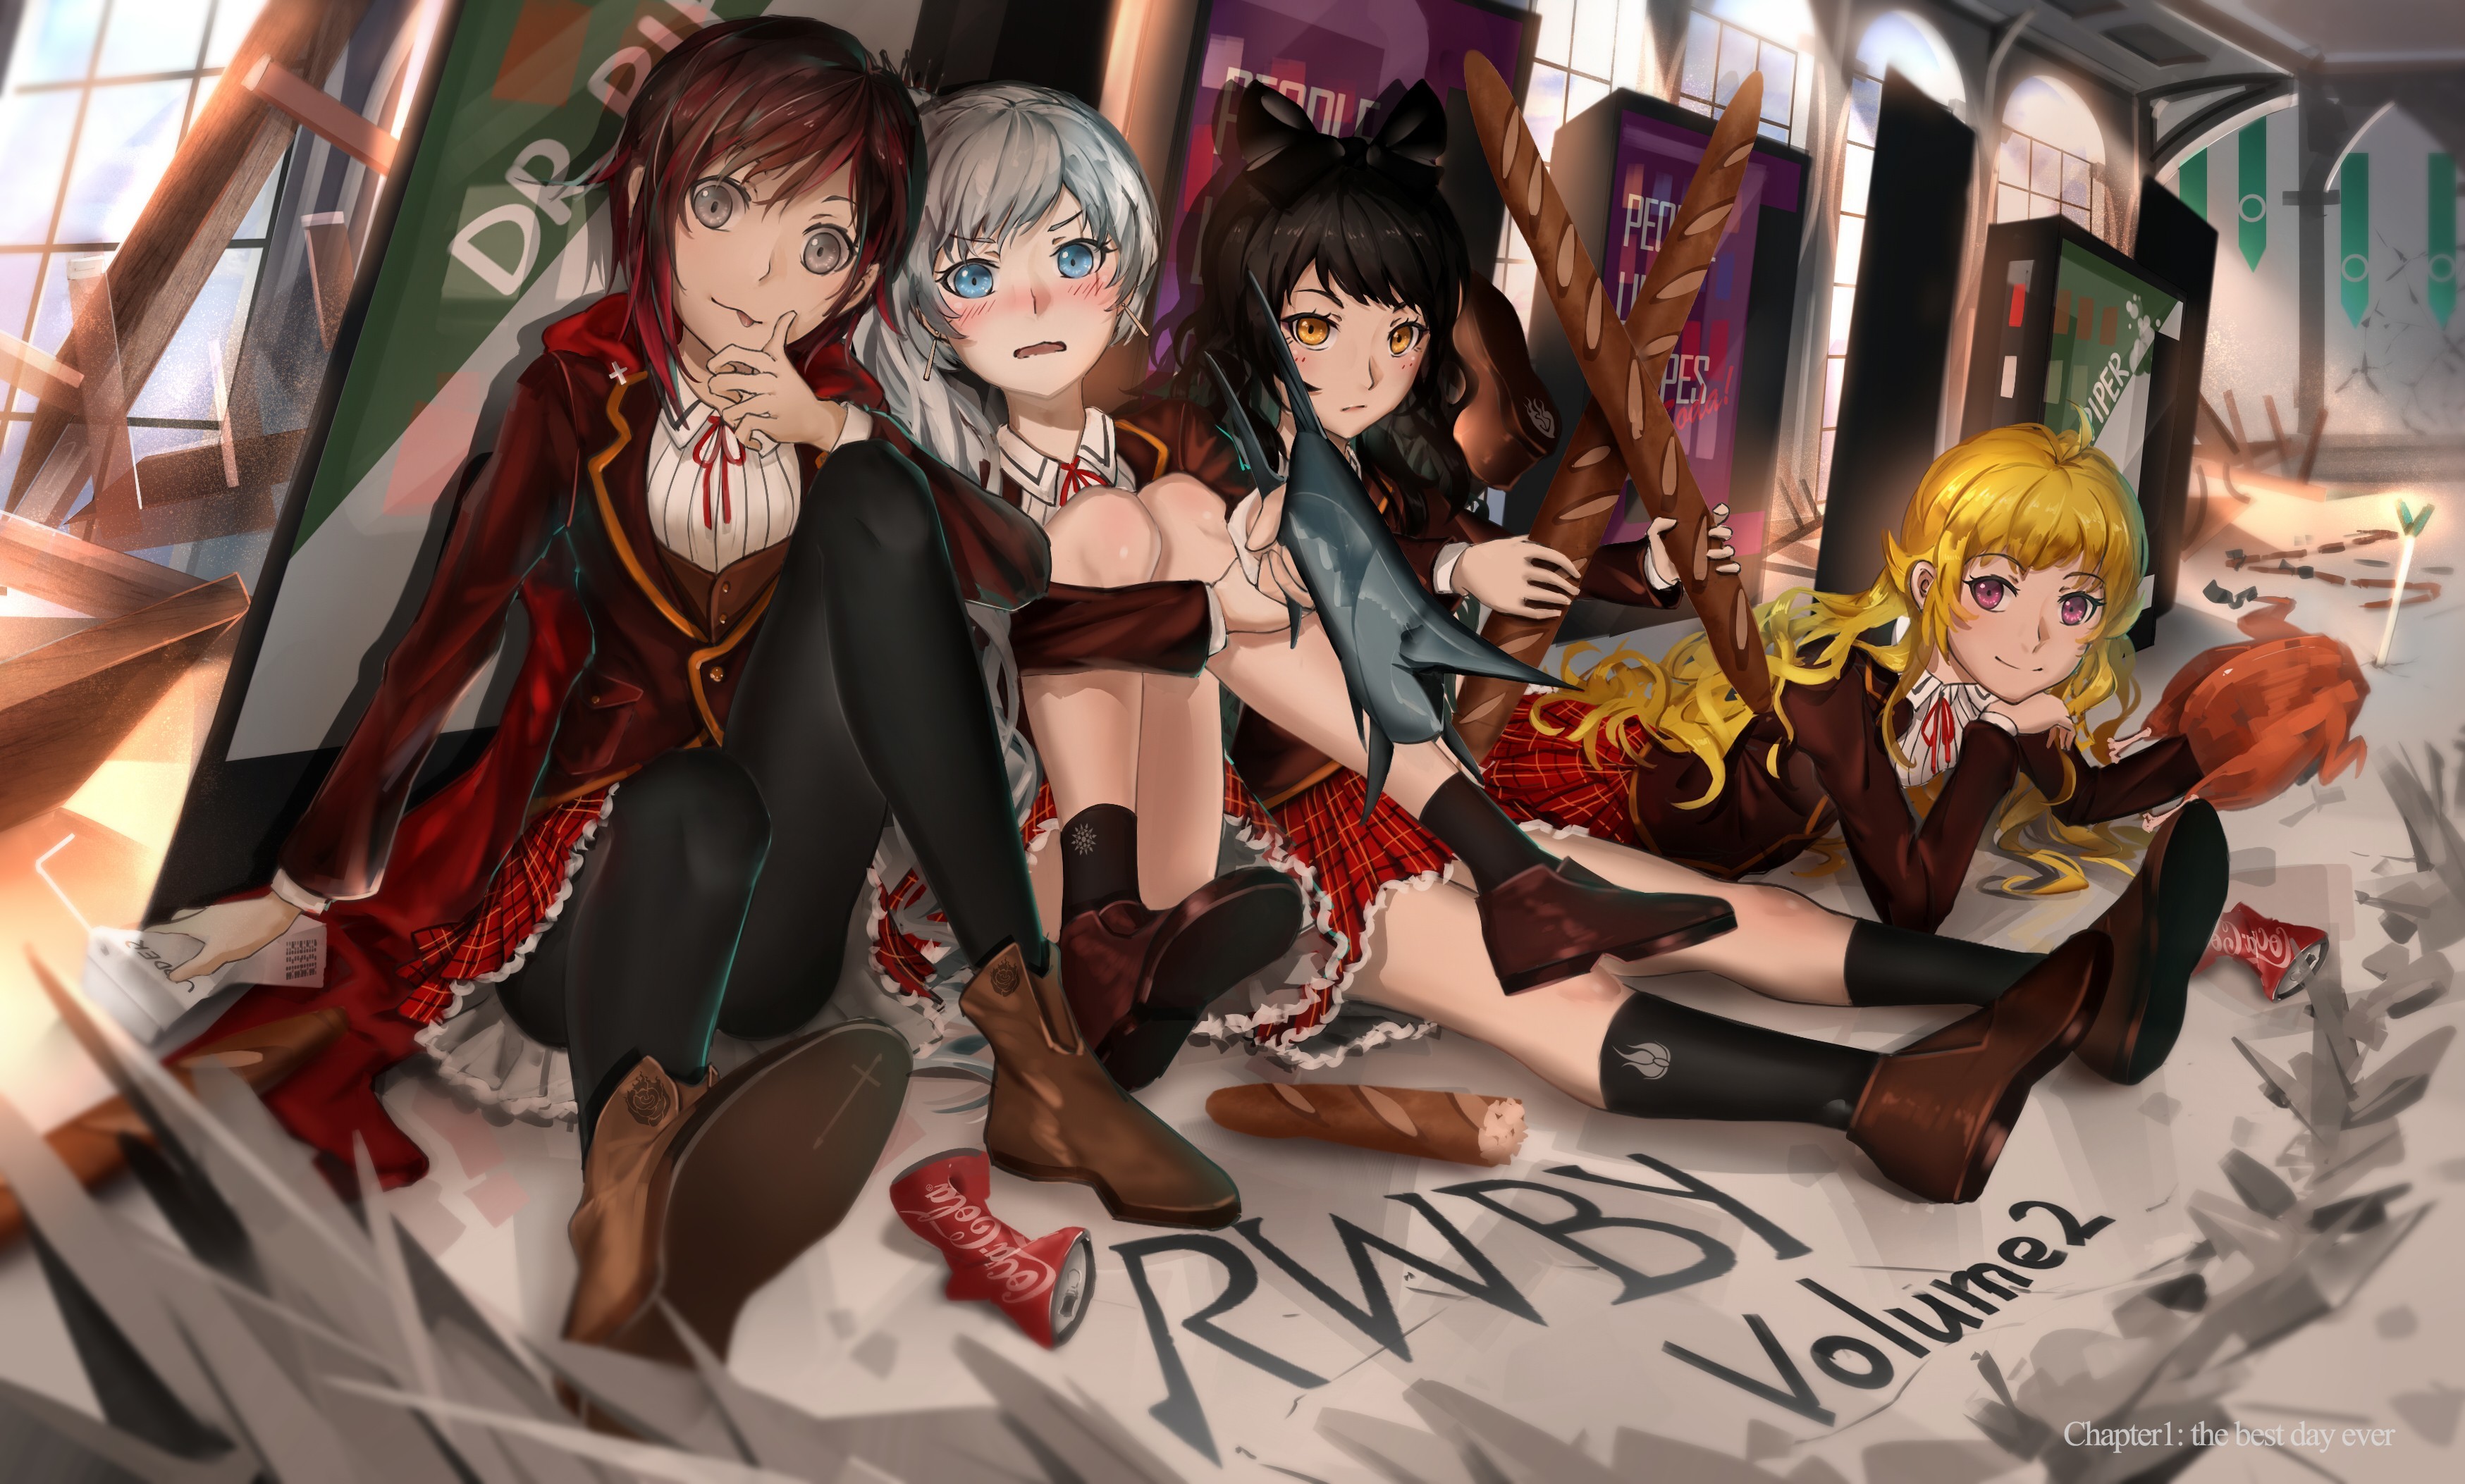 Anime Rooster Teeth RWBY Ruby Rose character Weiss Schnee Blake Belladonna Yang Xiao